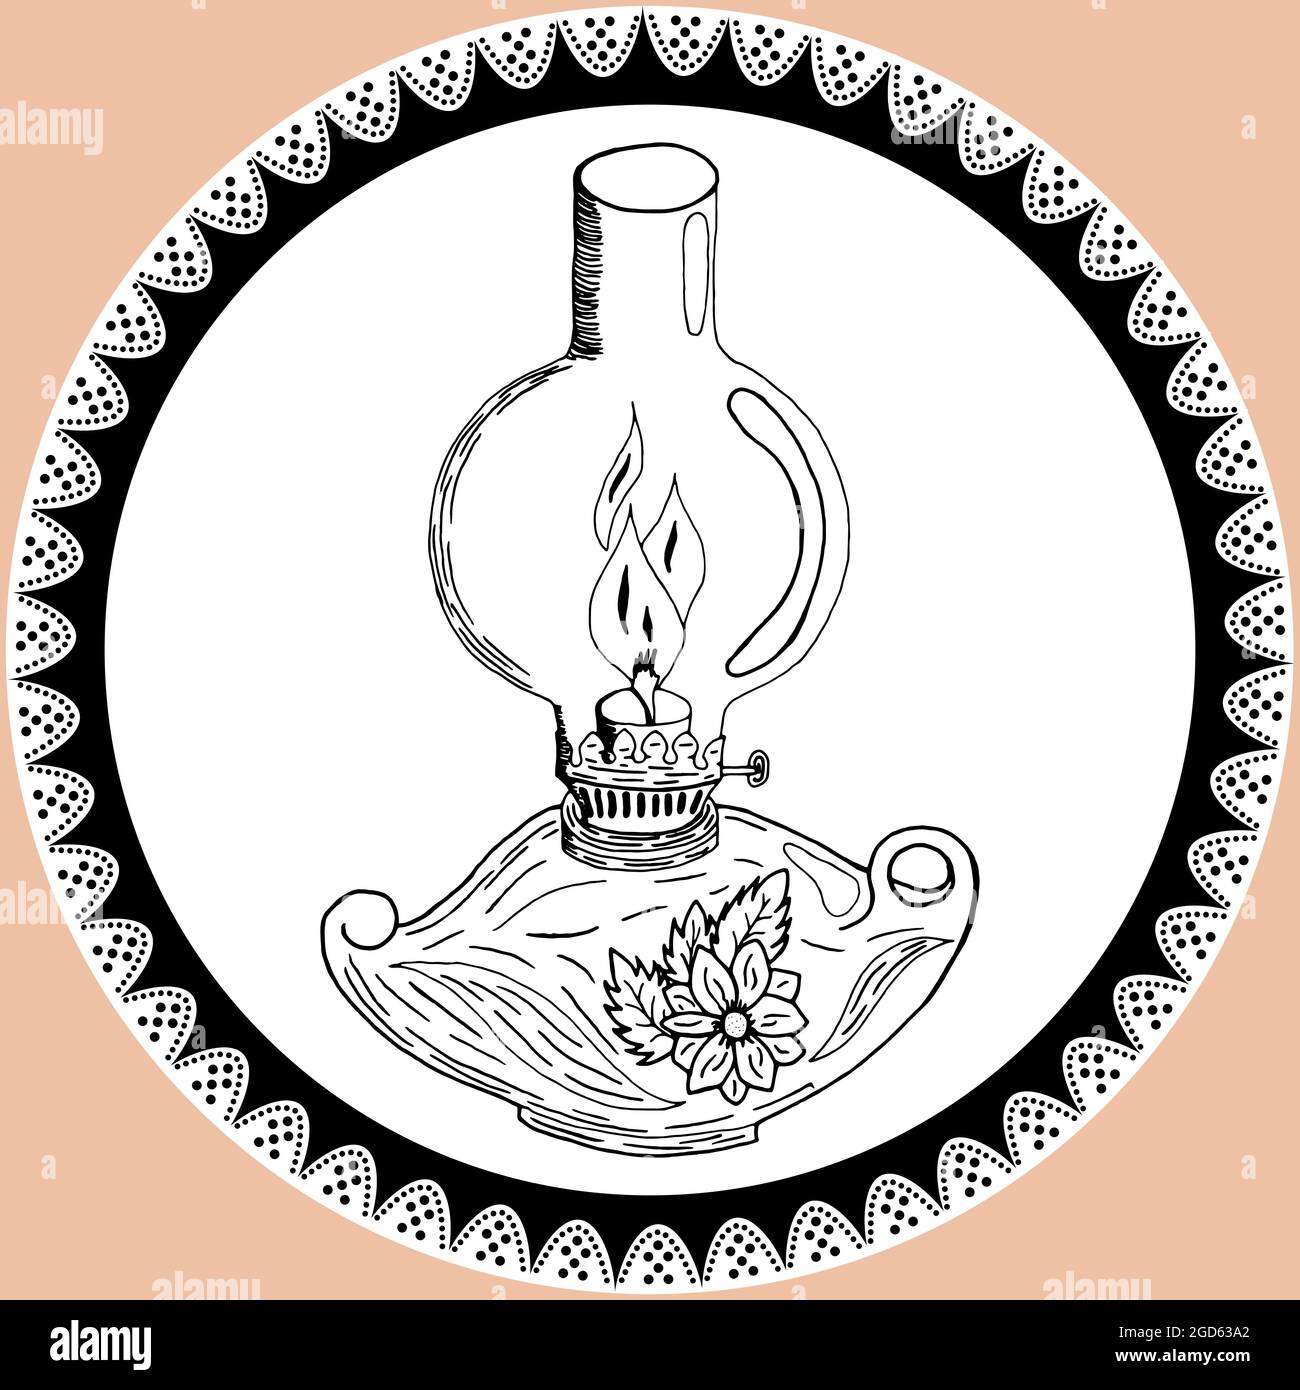 Doodle lantern, kerosene lamp in vintage style with lace. Silhouette of lamp hand drawn by pencil in black and white colors Stock Vector